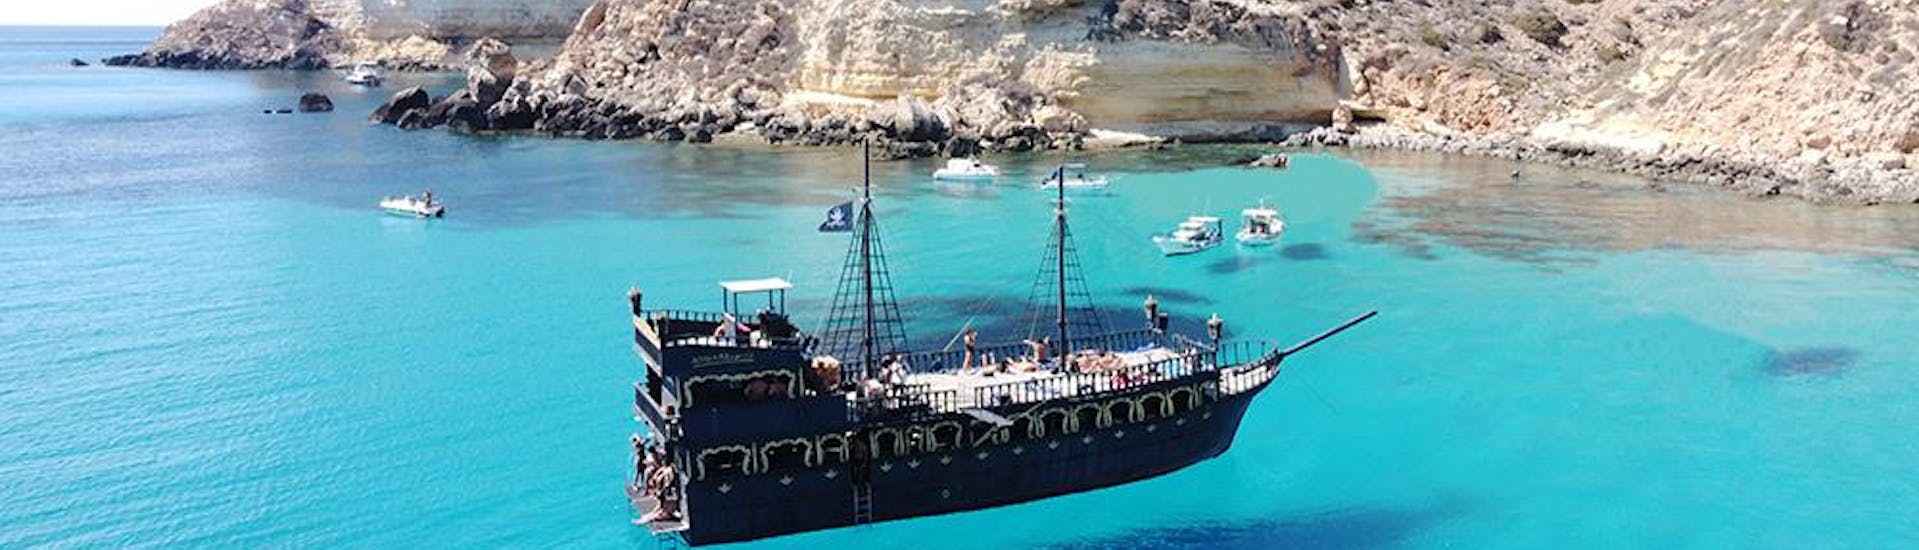 The pirate galleon Galeona Adriana navigating in the waters of Lampedusa.